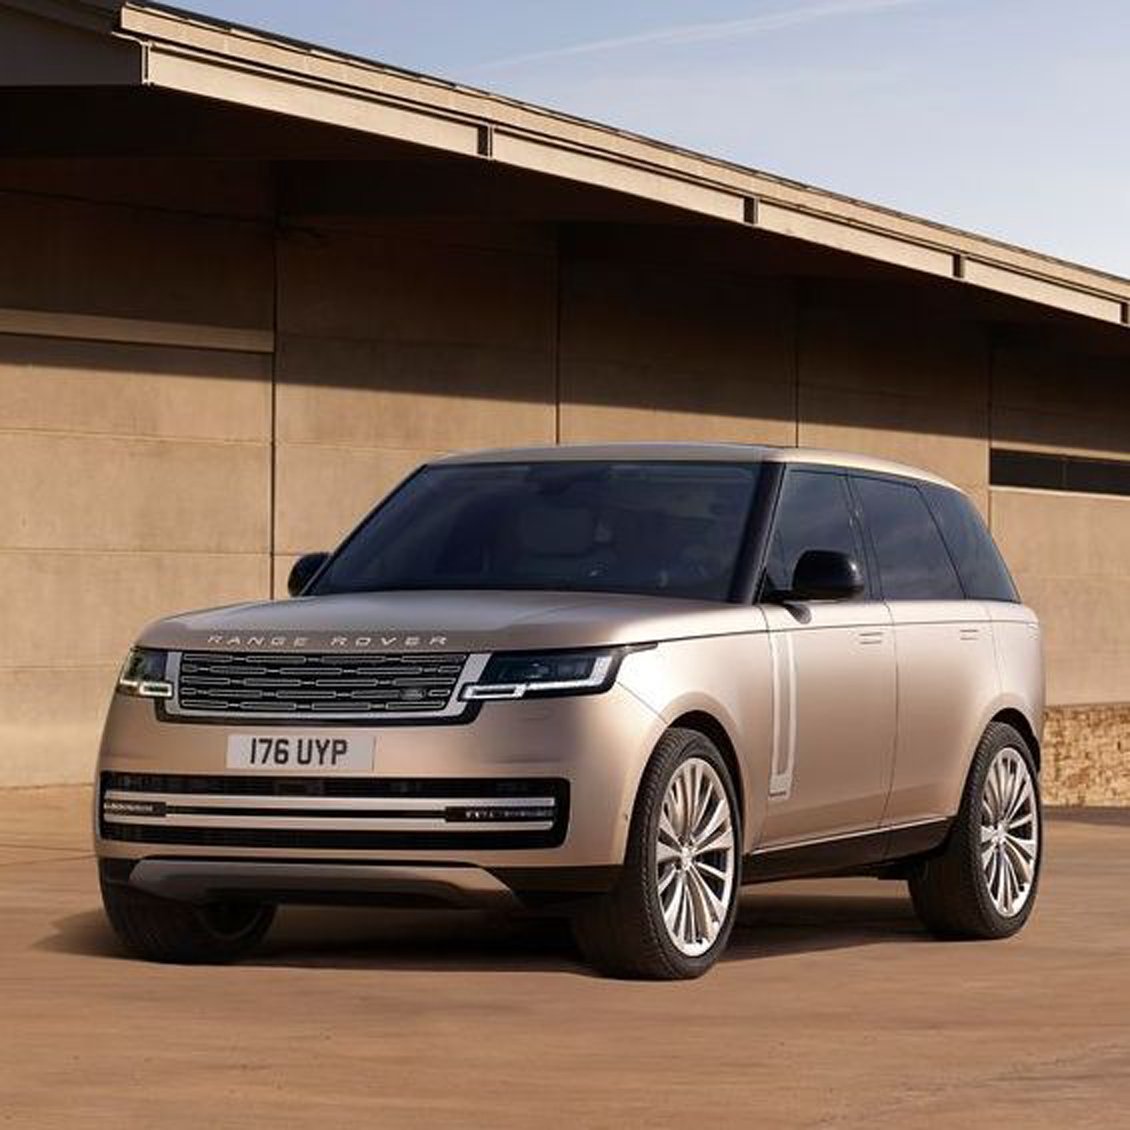 Range Rover Electric Car Lease UK